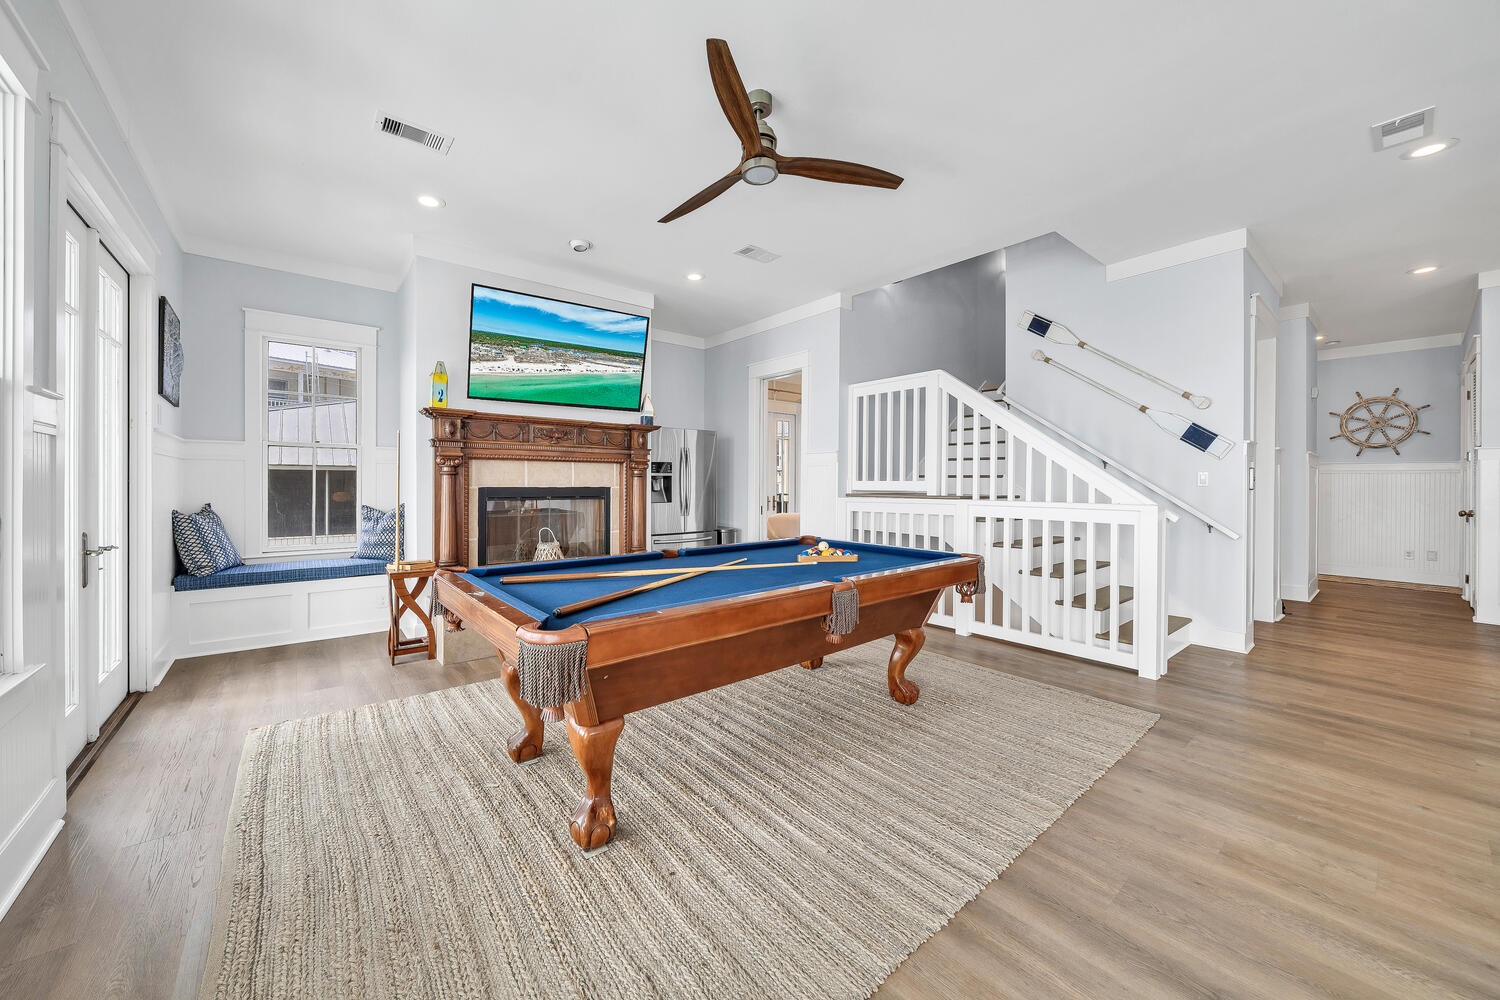 2nd floor with large flat screen and pool table